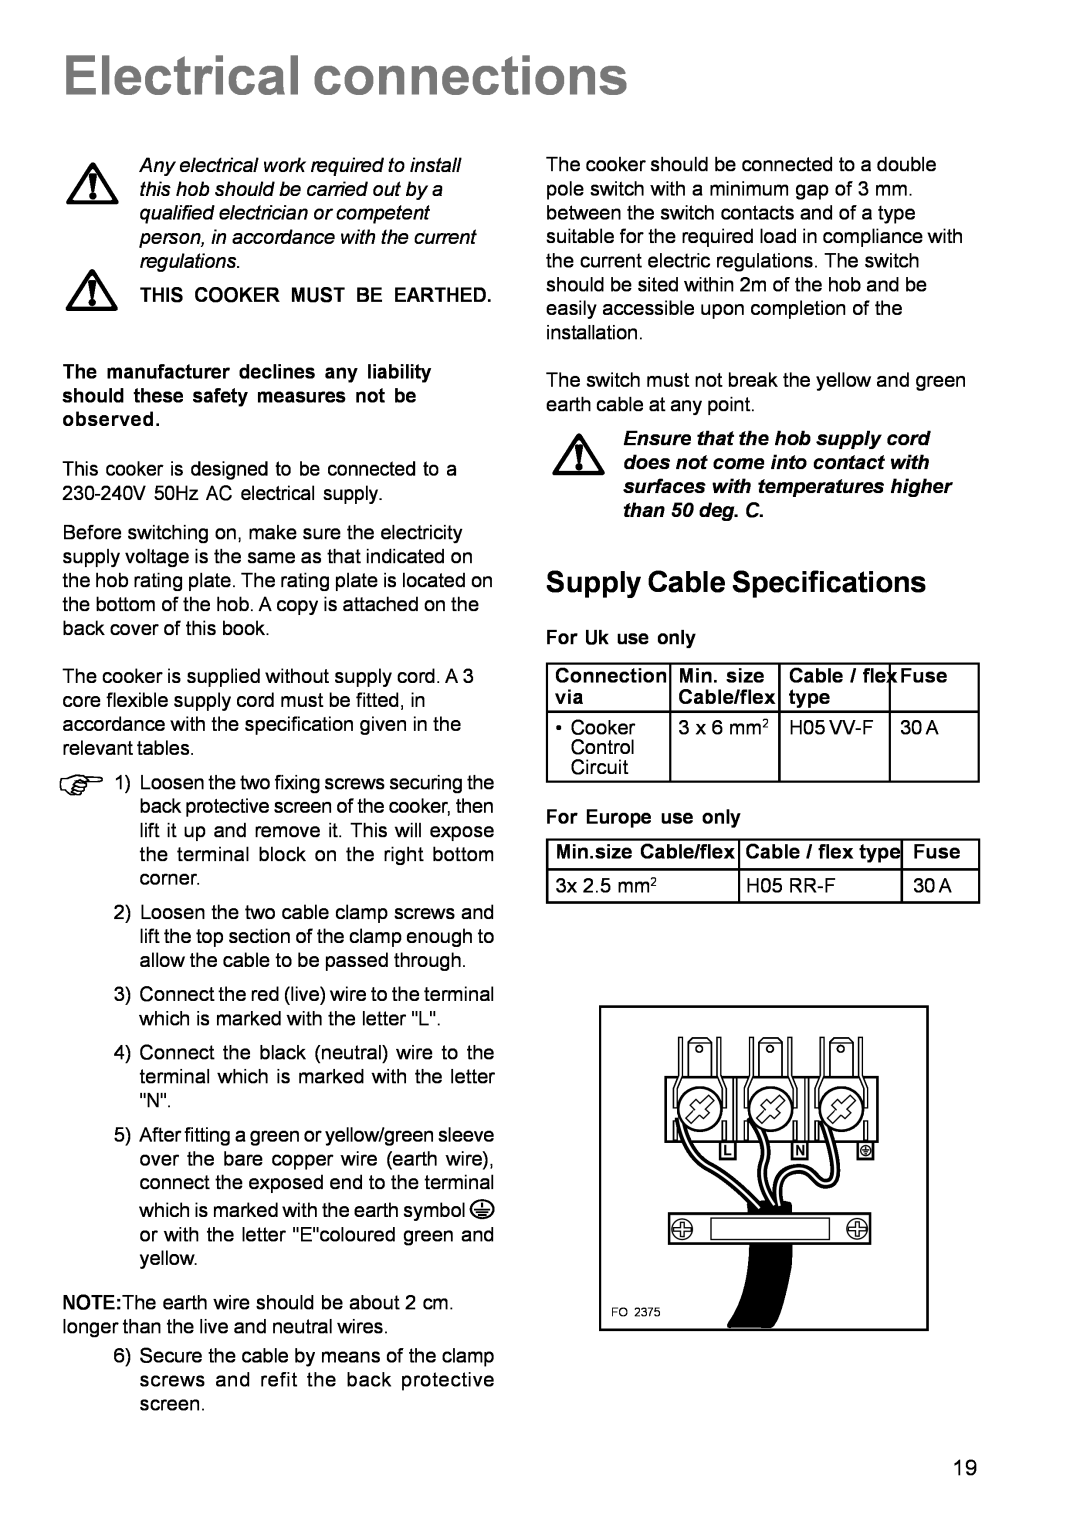 Electrolux EK 5741 manual Electrical connections, Supply Cable Specifications 